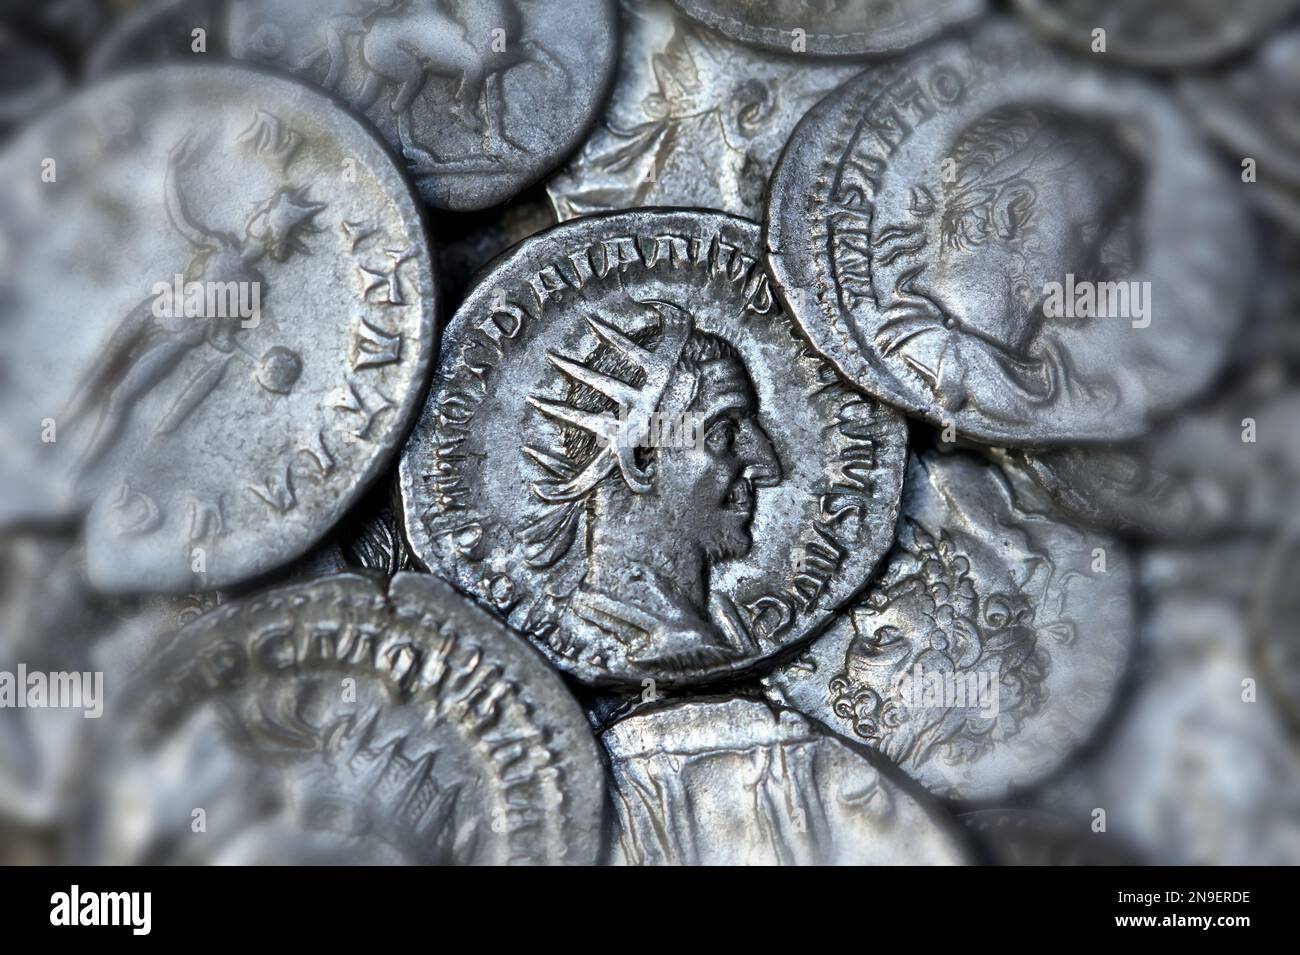 Collection of ancient Roman silver coins Stock Photo